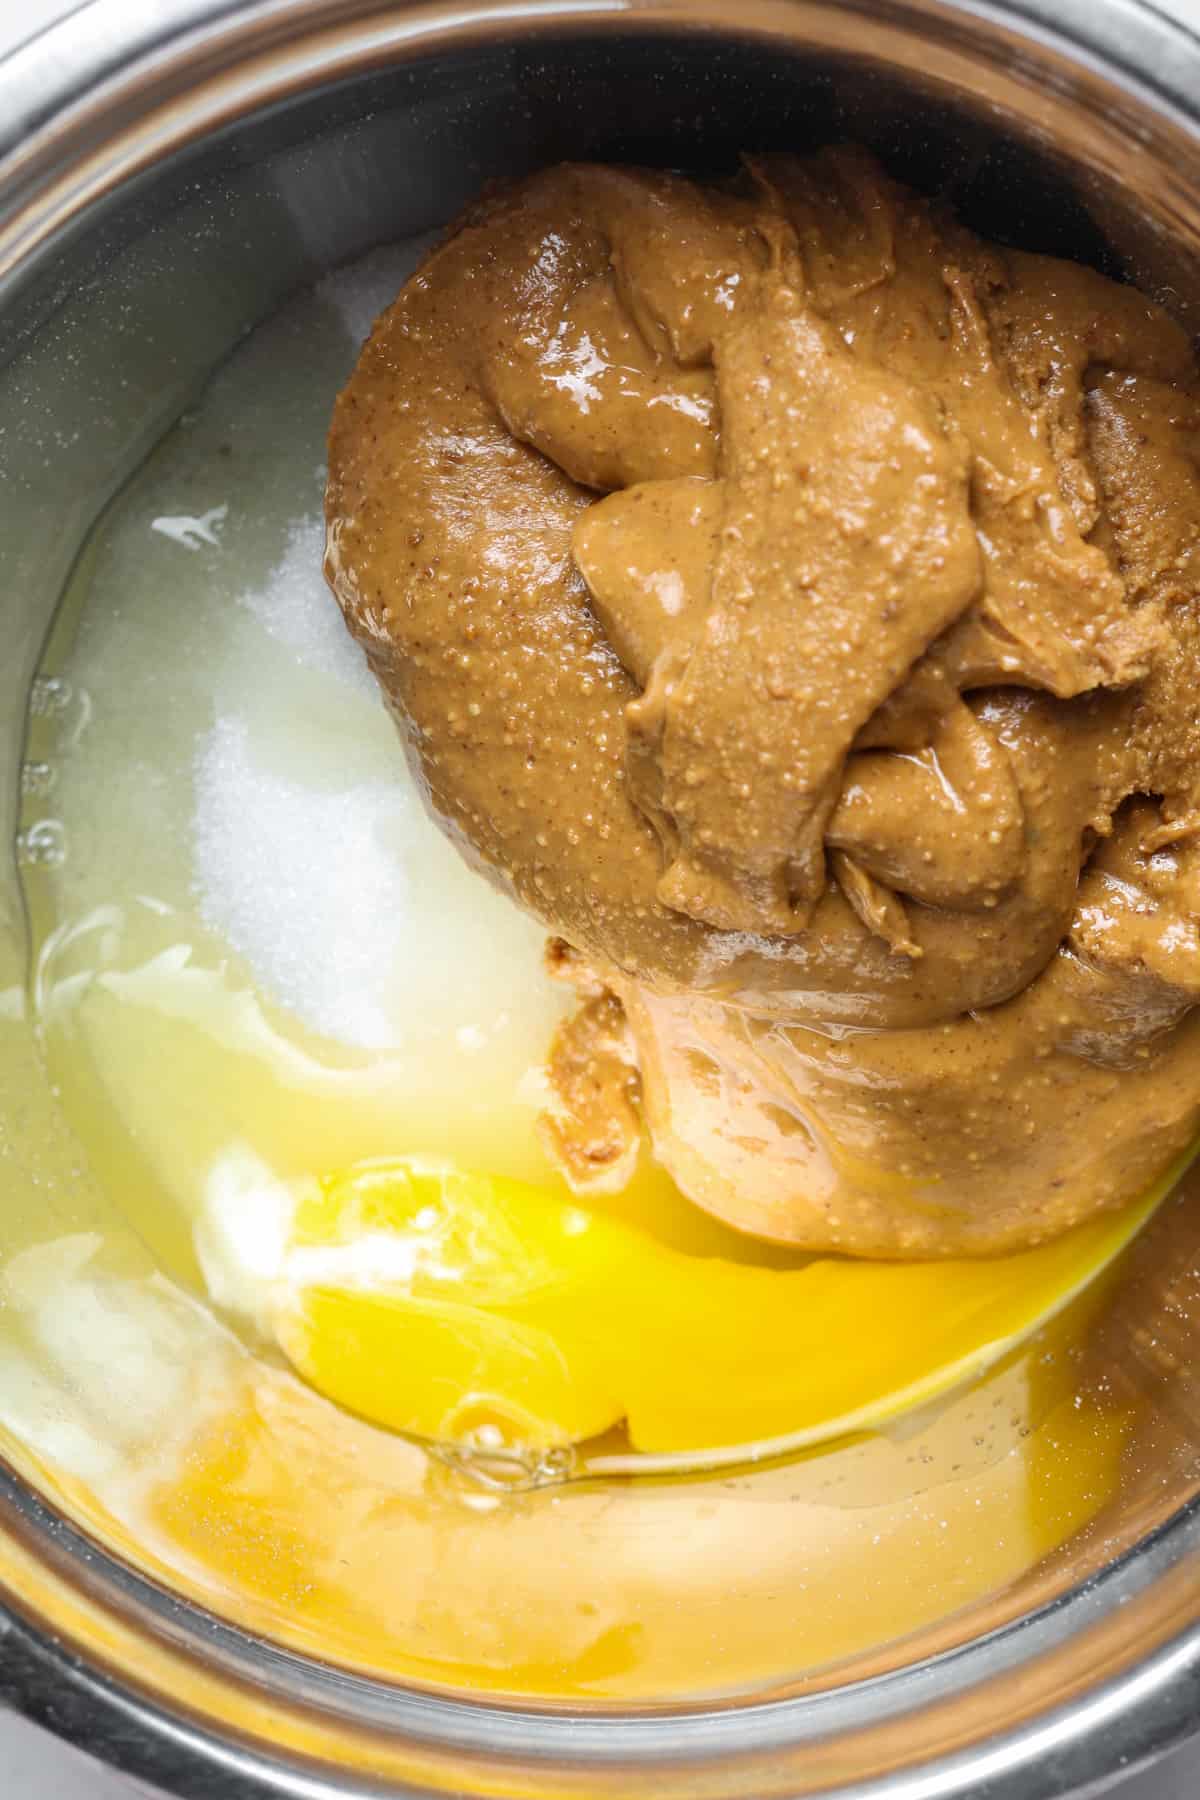 Nut butter, monk fruit and egg.